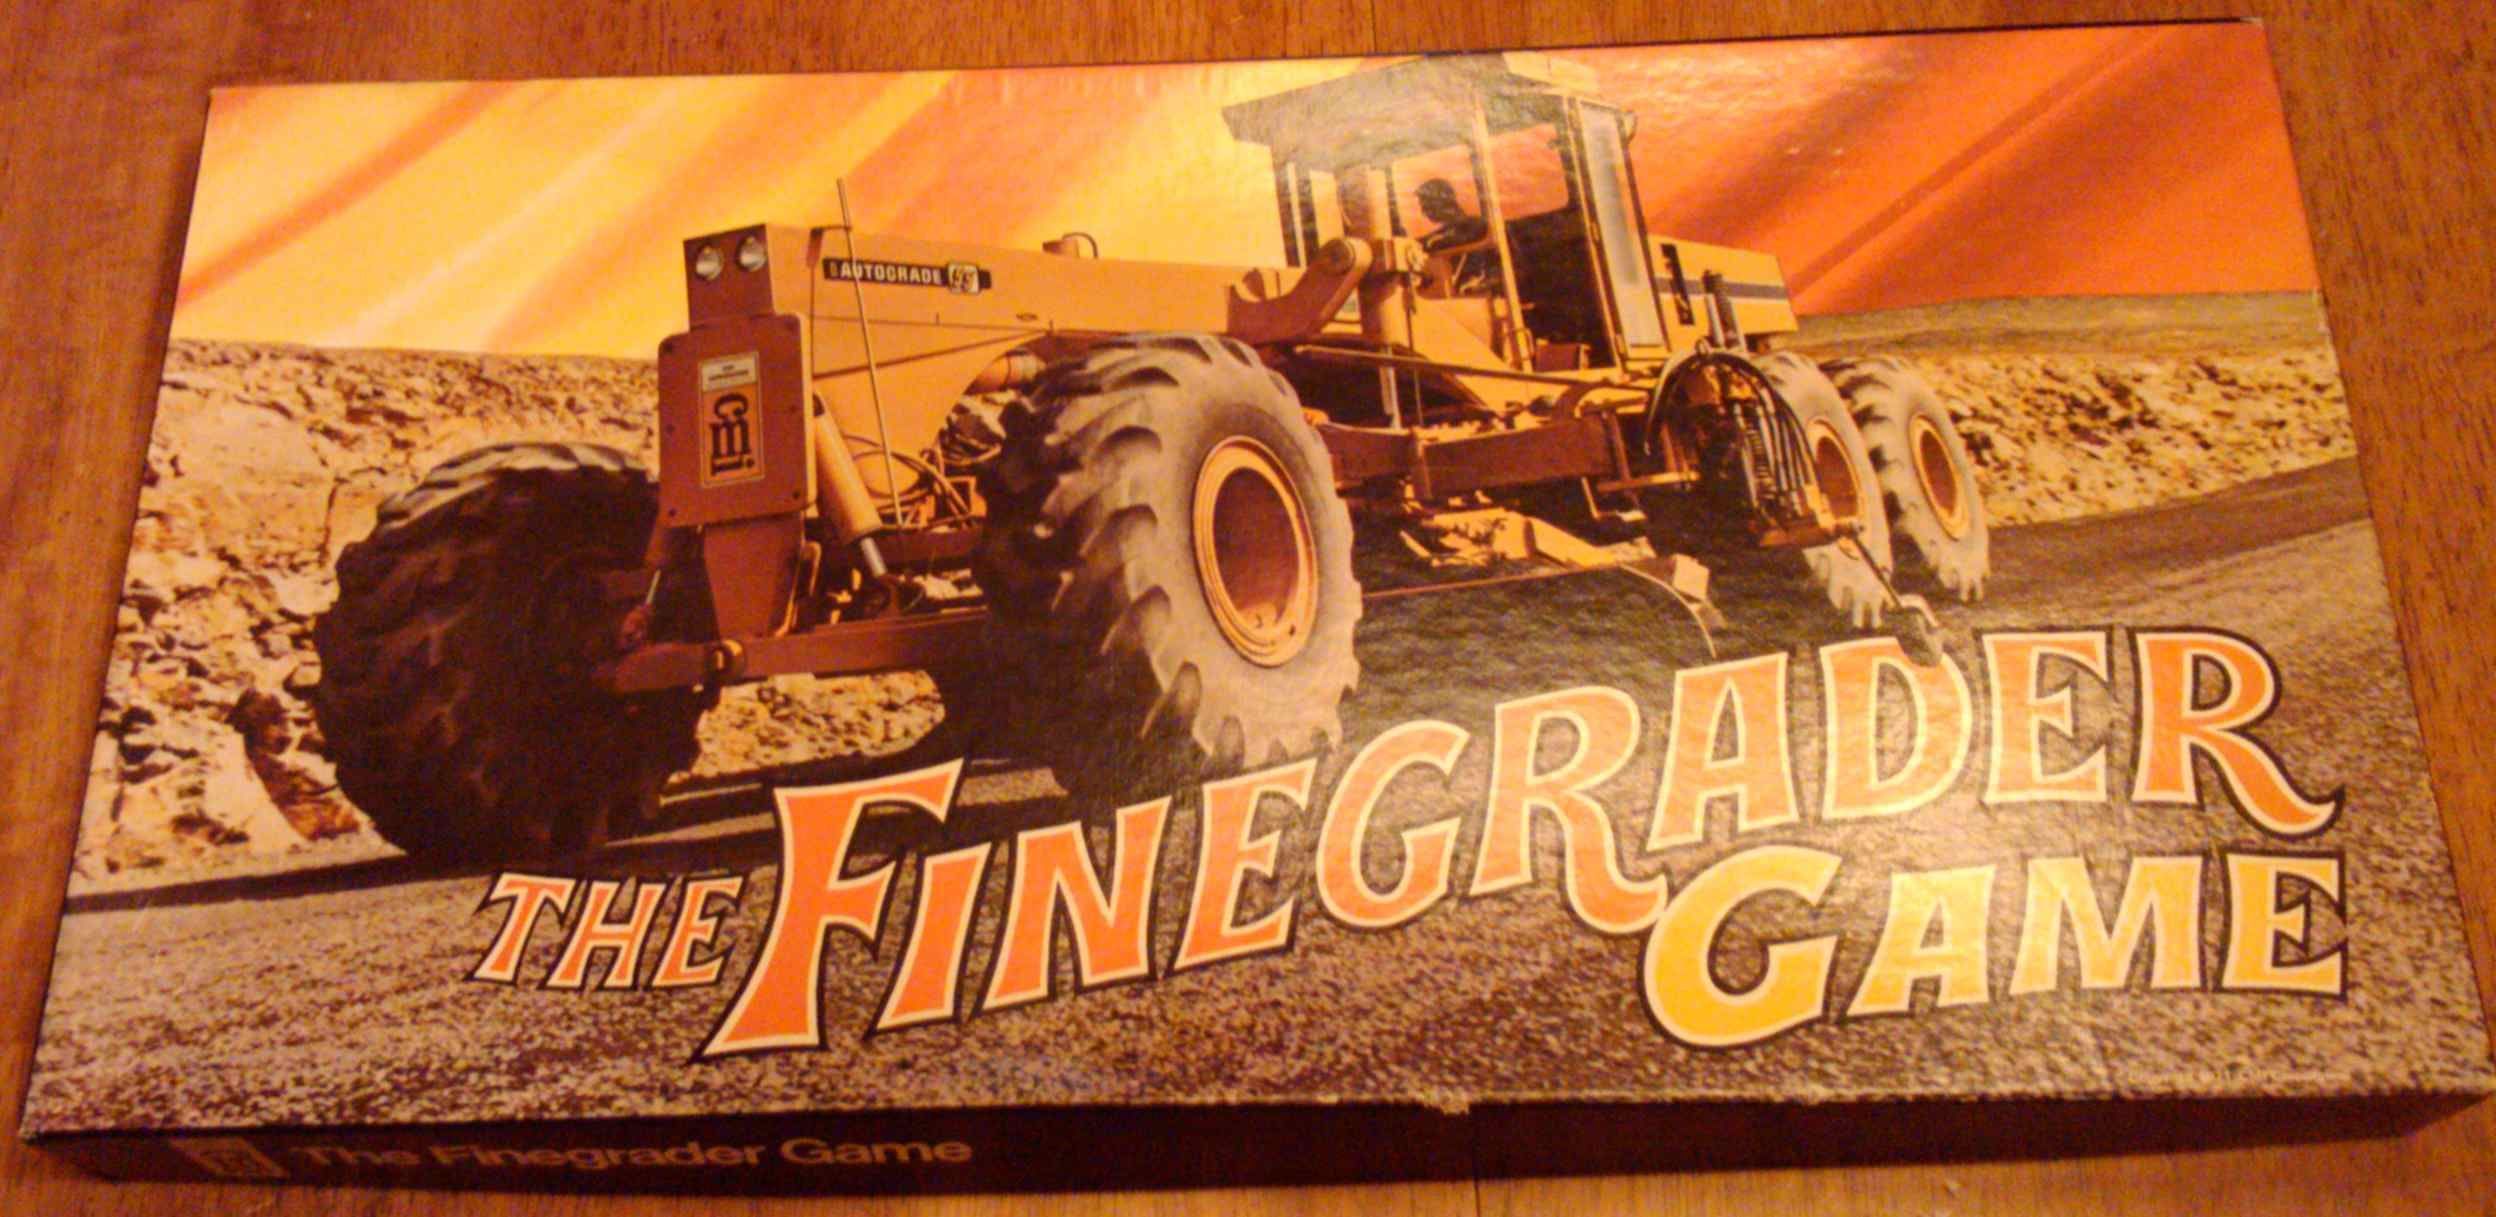 The Finegrader Game